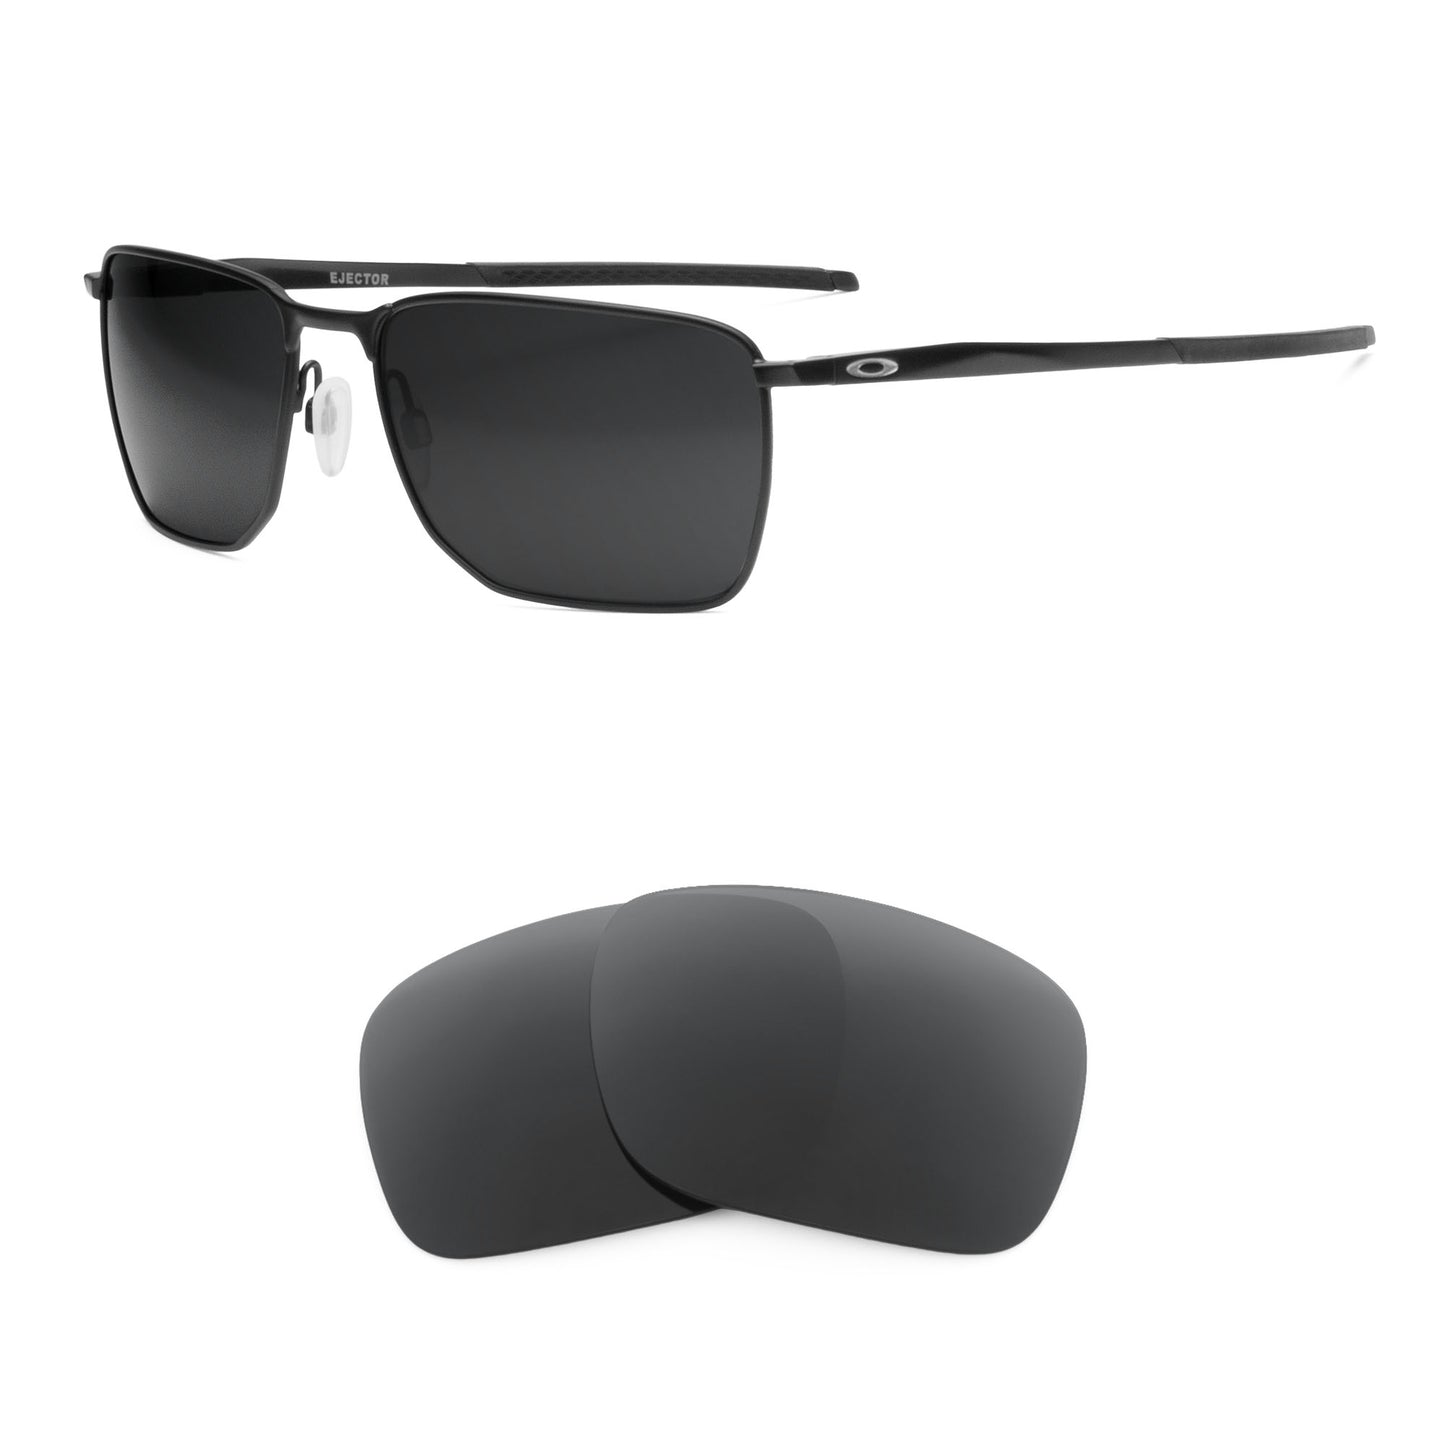 Oakley Ejector sunglasses with replacement lenses